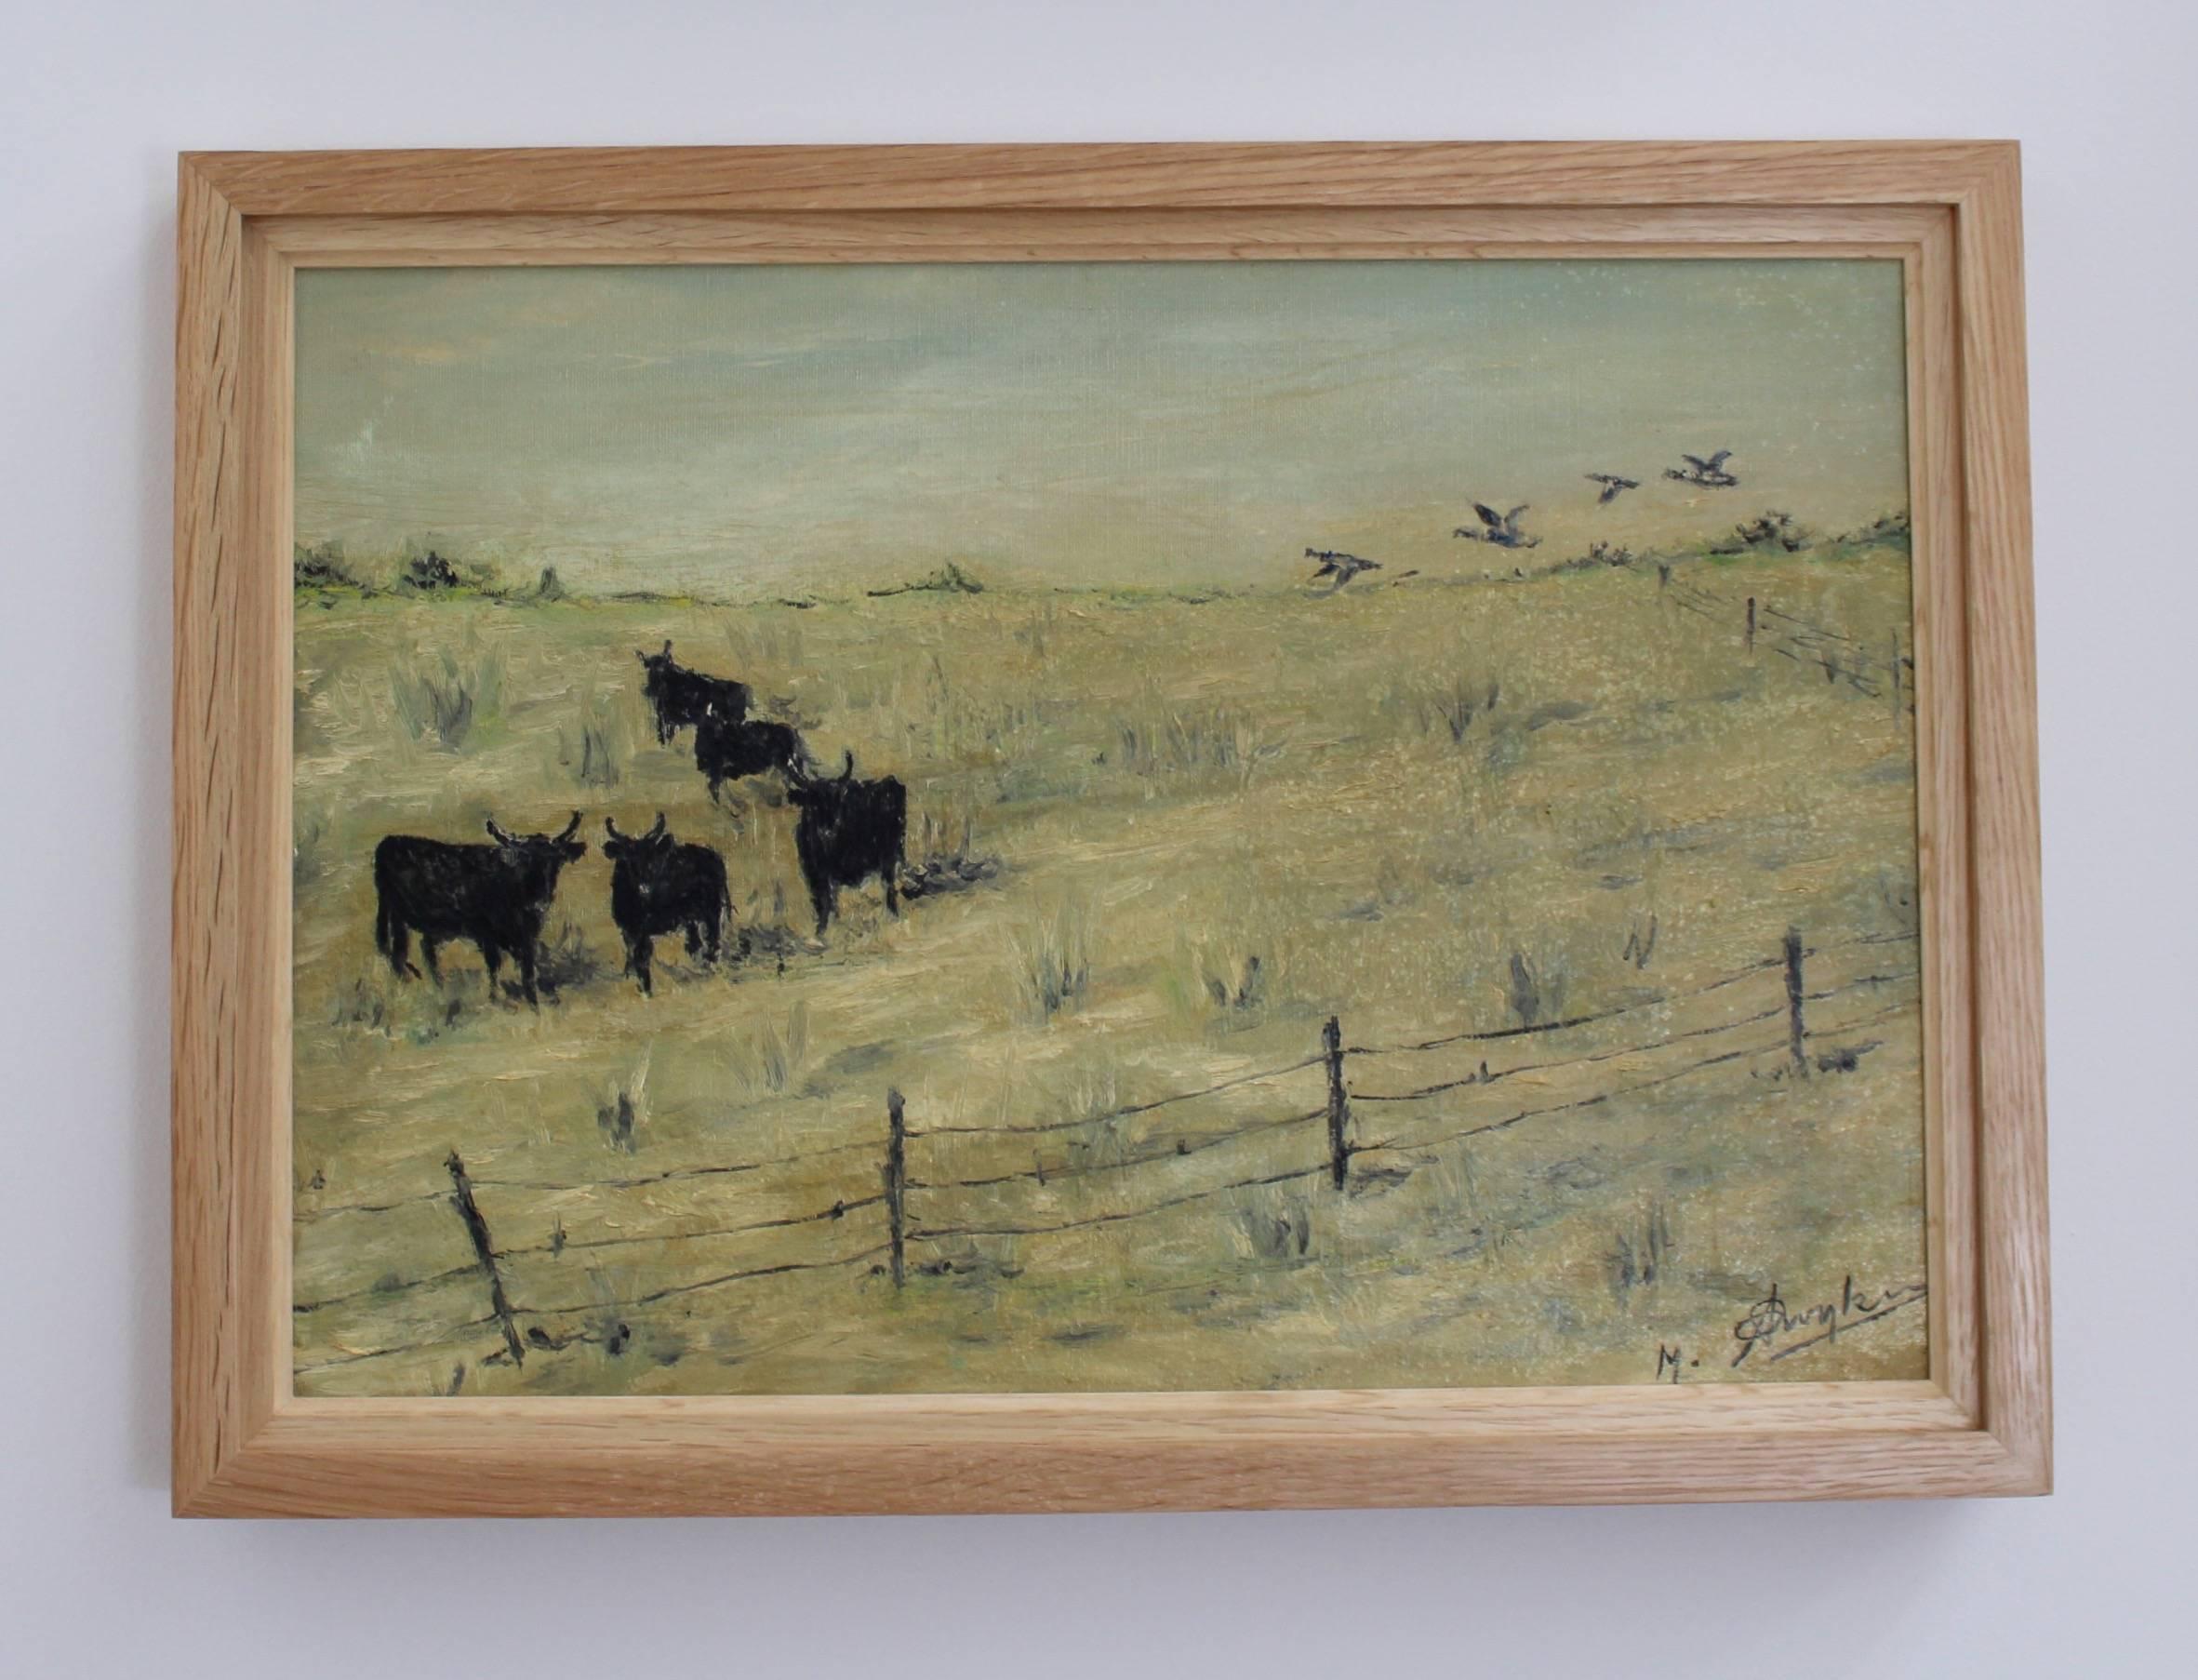 'Grazing Bulls in the Camargue' by M. Arvanitakis, Mid-Century Oil Landscape  5